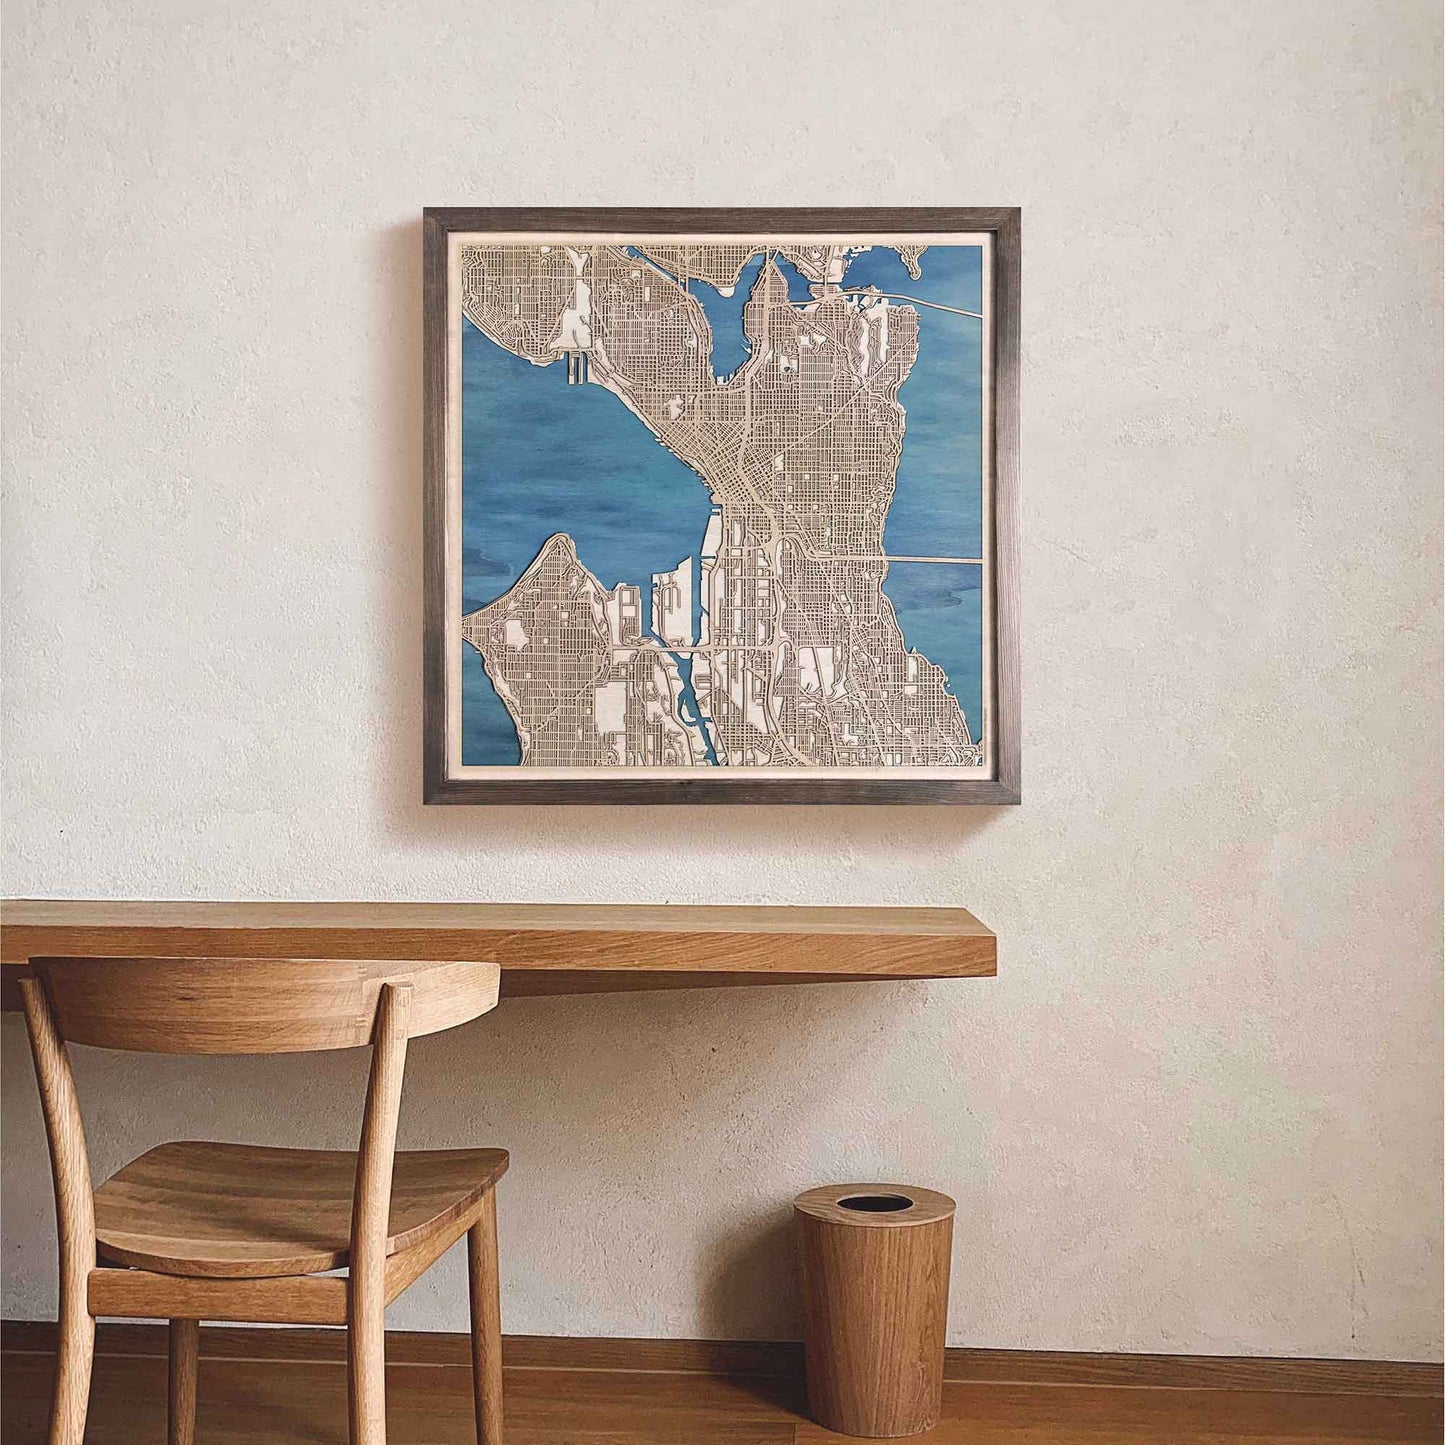 Seattle Wooden Map by CityWood - Custom Wood Map Art - Unique Laser Cut Engraved - Anniversary Gift